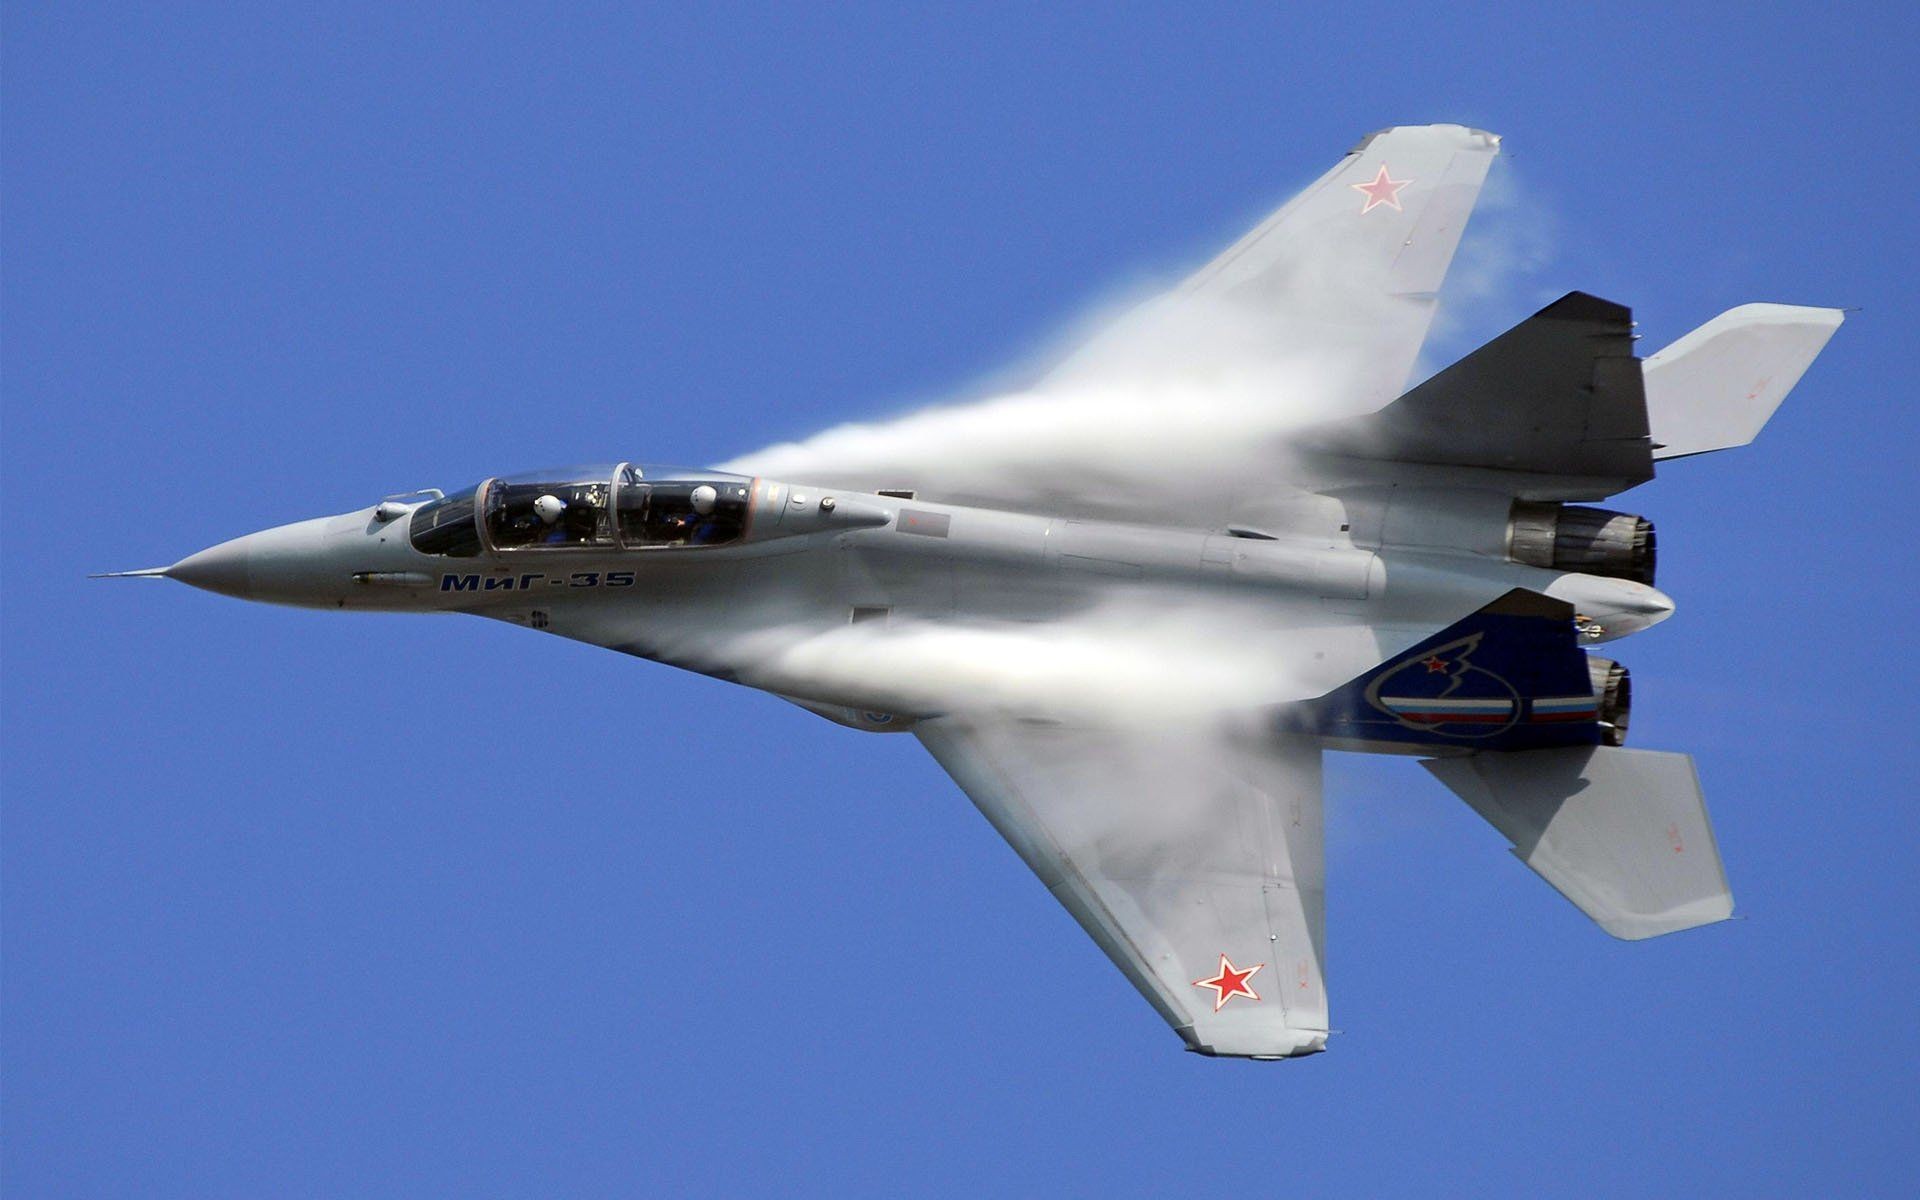 General 1920x1200 Russian Air Force Mikoyan MiG-35 military aircraft vehicle aircraft military military vehicle jet fighter condensation Russian/Soviet aircraft Mikoyan-Gurevich